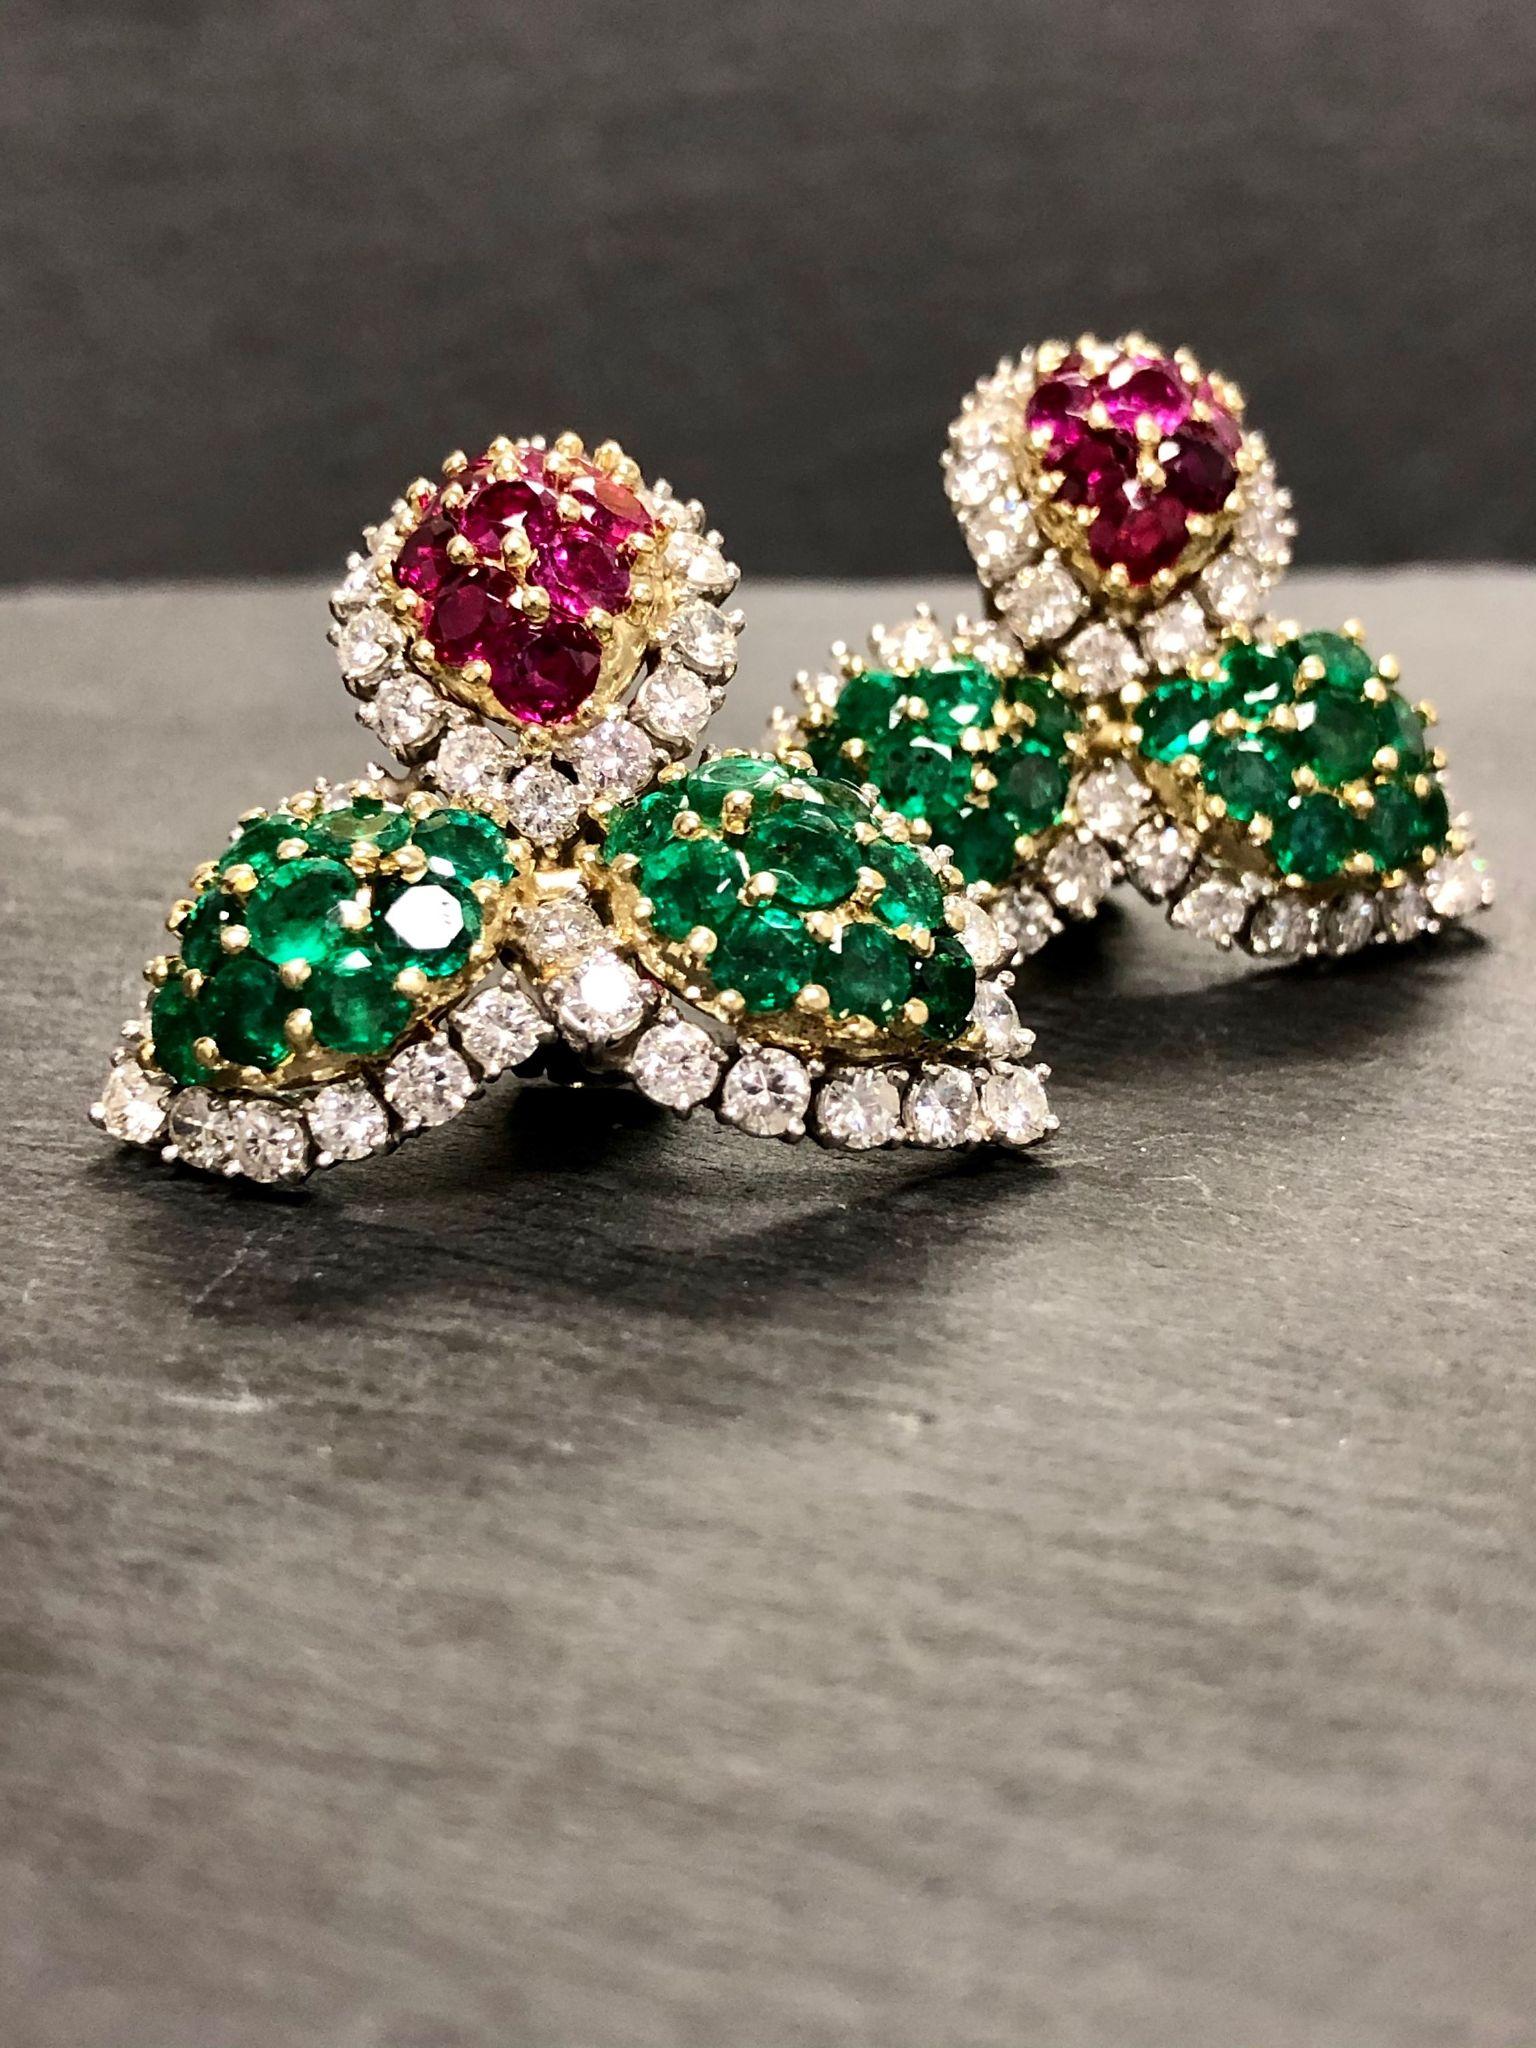 A vintage pair of statement earrings done in platinum and 18K set with approximately 6.50cttw in G-I color Vs2-Si2 clarity diamonds as well as approximately 3.60cttw in natural rubies and 5.40cttw in natural emeralds.

Dimensions/Weight
1 1/4” by 1